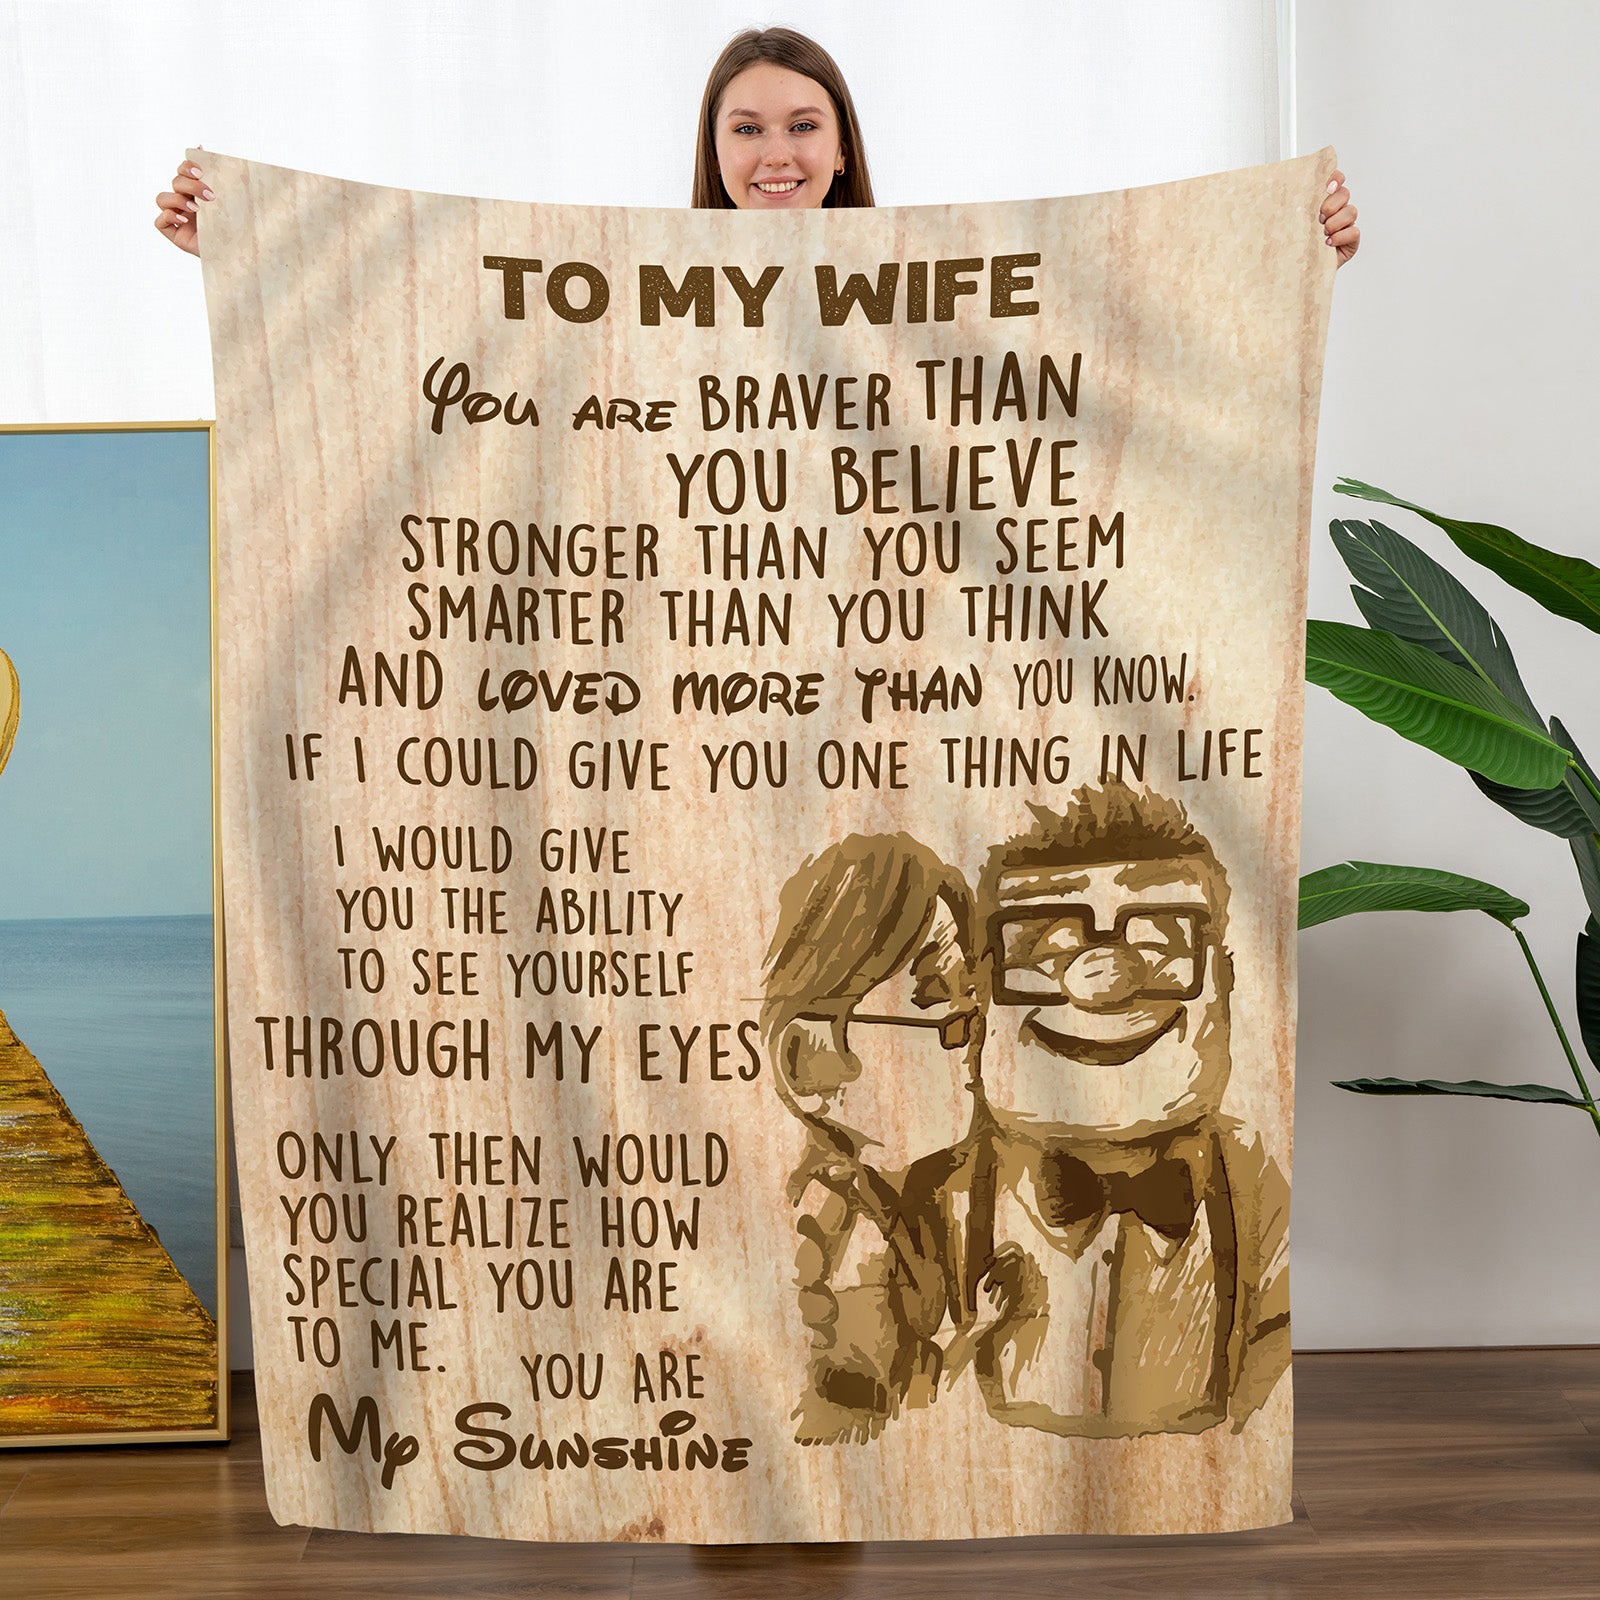 Mohters Day Gifts for Wife, from Husband to My Wife Blanket Anniversary Gifts